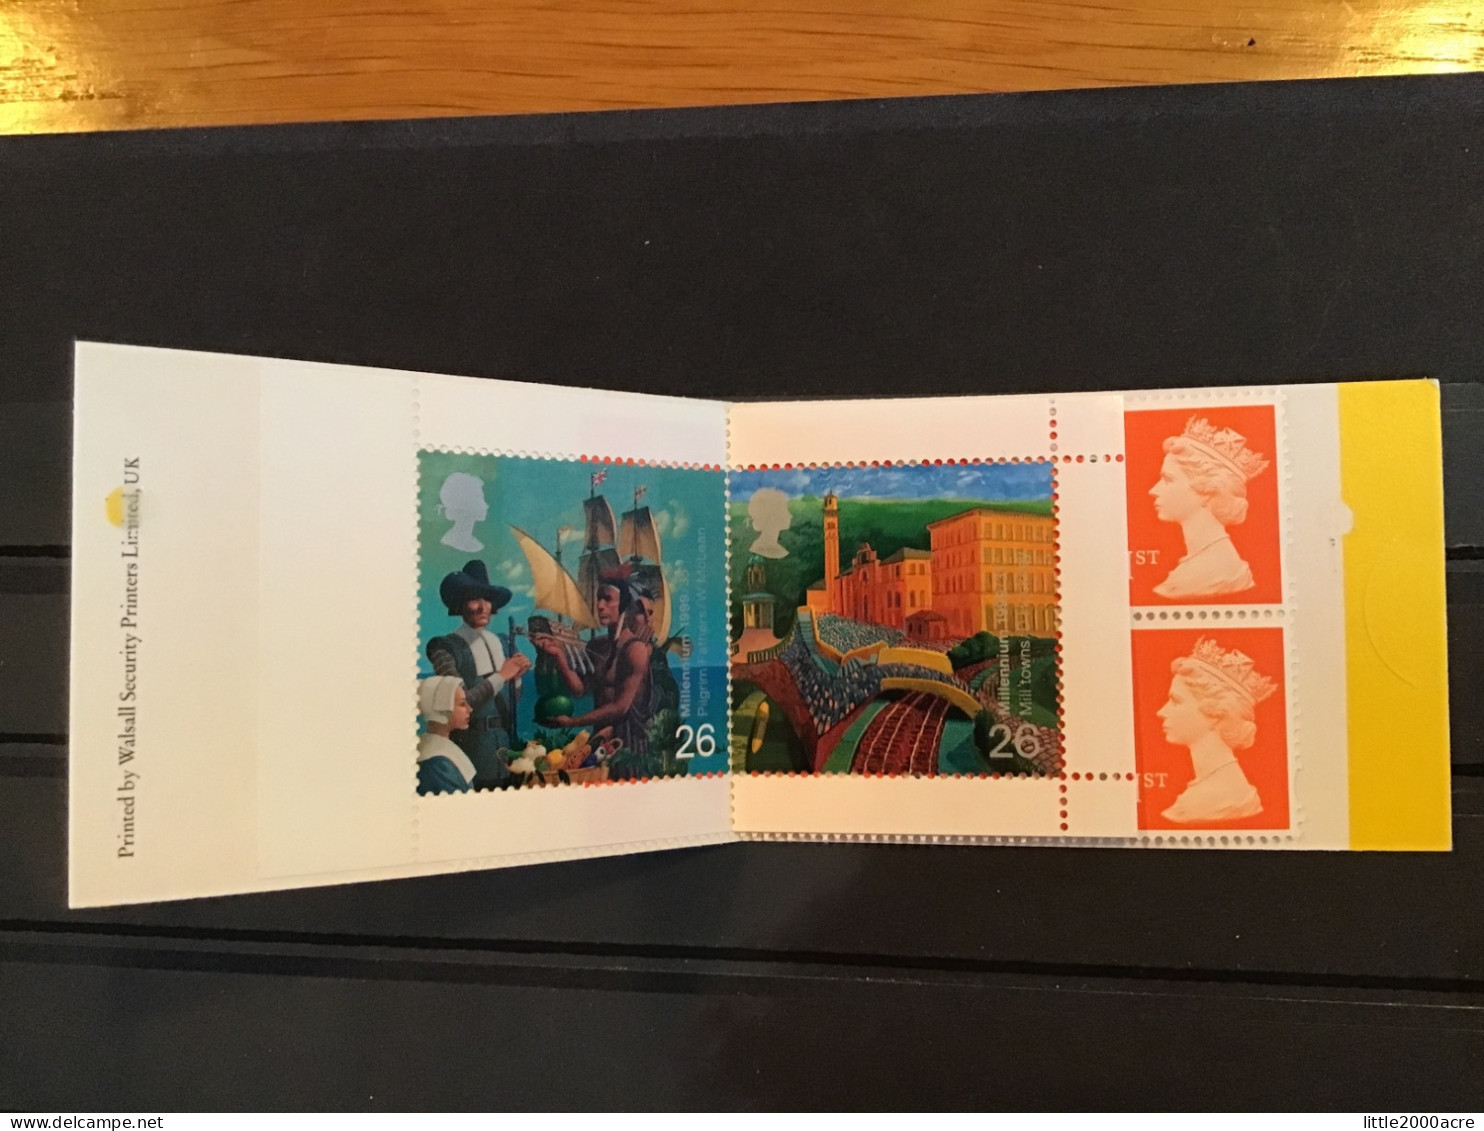 GB 1999 10 1st Class Stamps Barcode Booklet £2.60 MNH SG HBA1 - Booklets